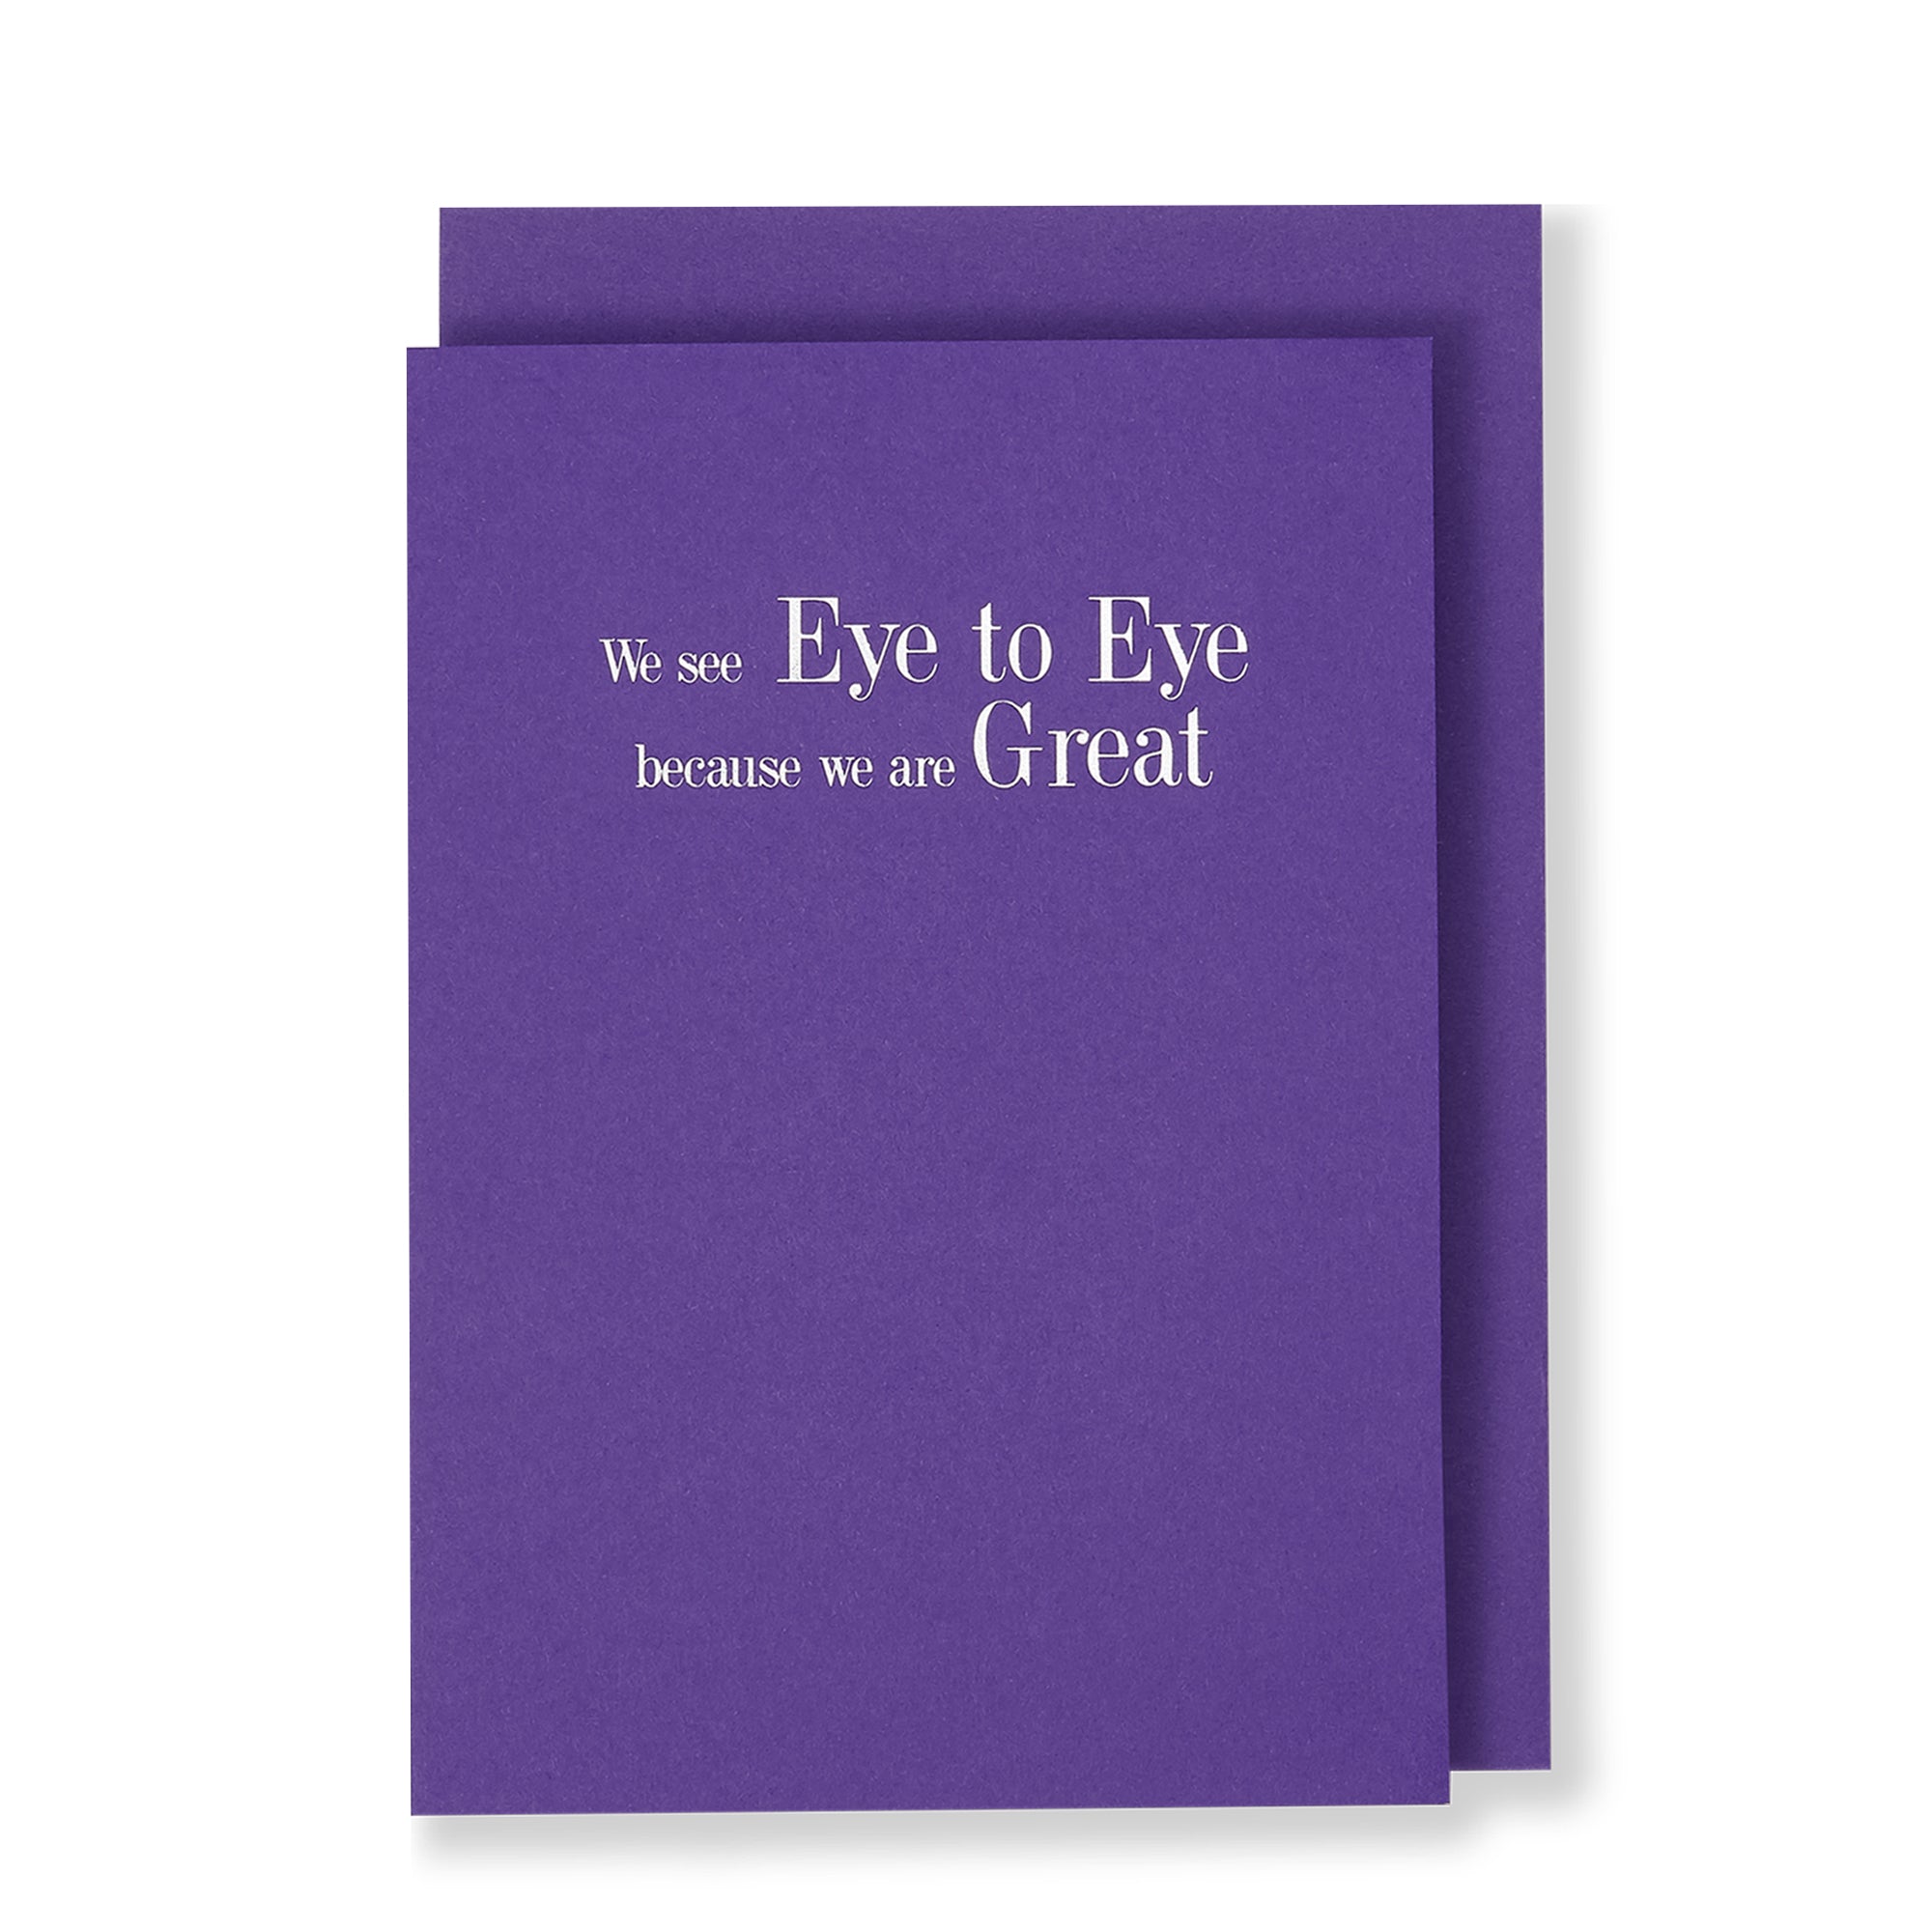 We See Eye To Eye Because We Are Great Greeting Card in Warm Purple, Front